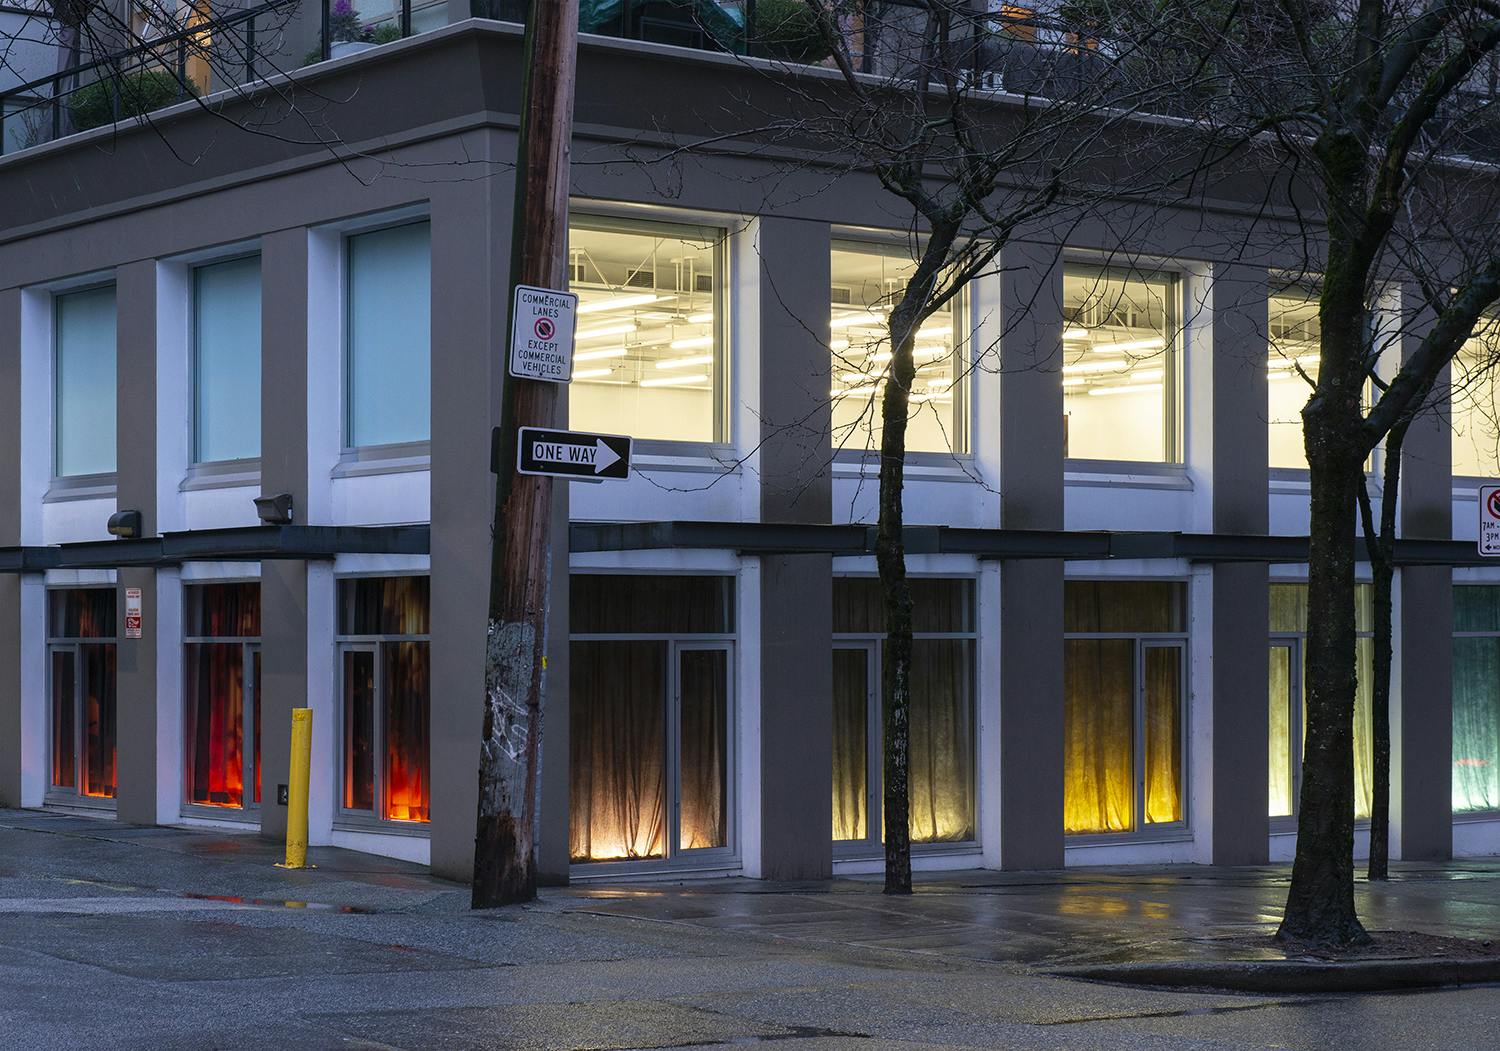 Exterior of the Contemporary Art Gallery displaying the work of Nicole Kelly Westman in the windows. The eight windows on the first floor are lit, highlighting various coloured backdrops.